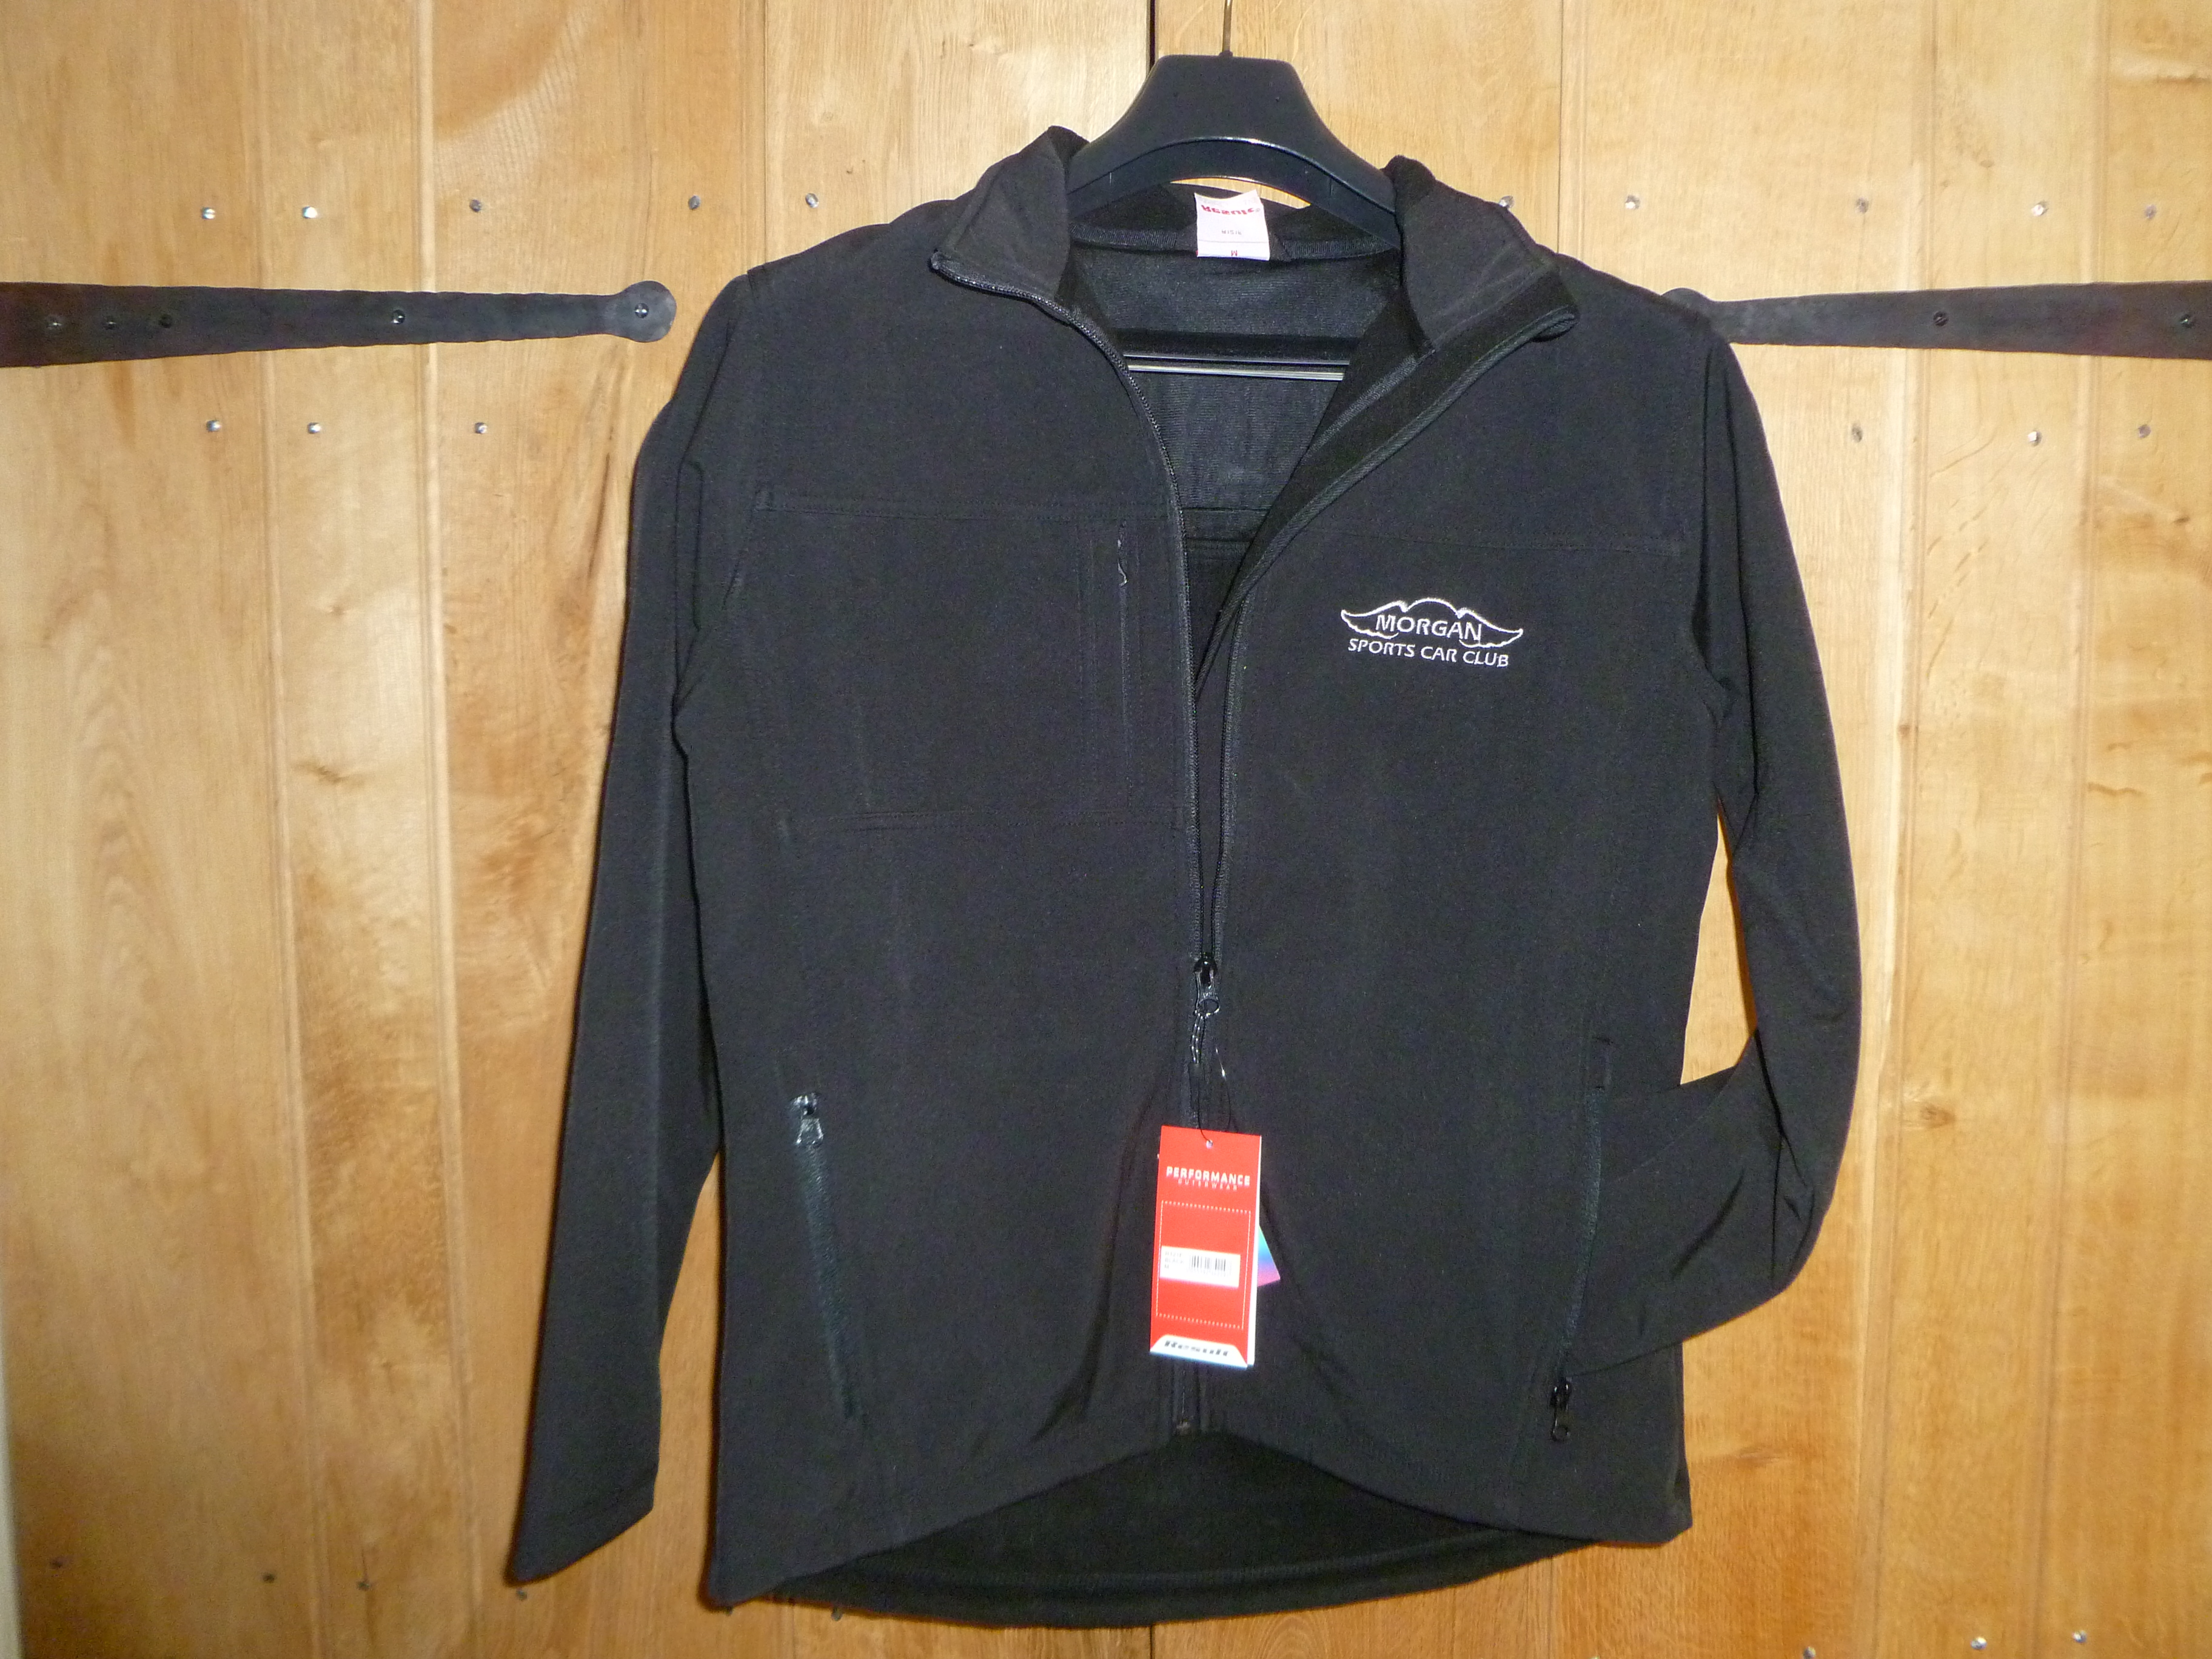 Shell Jacket Mens - Black with Grey Wings Silhouette logo and script